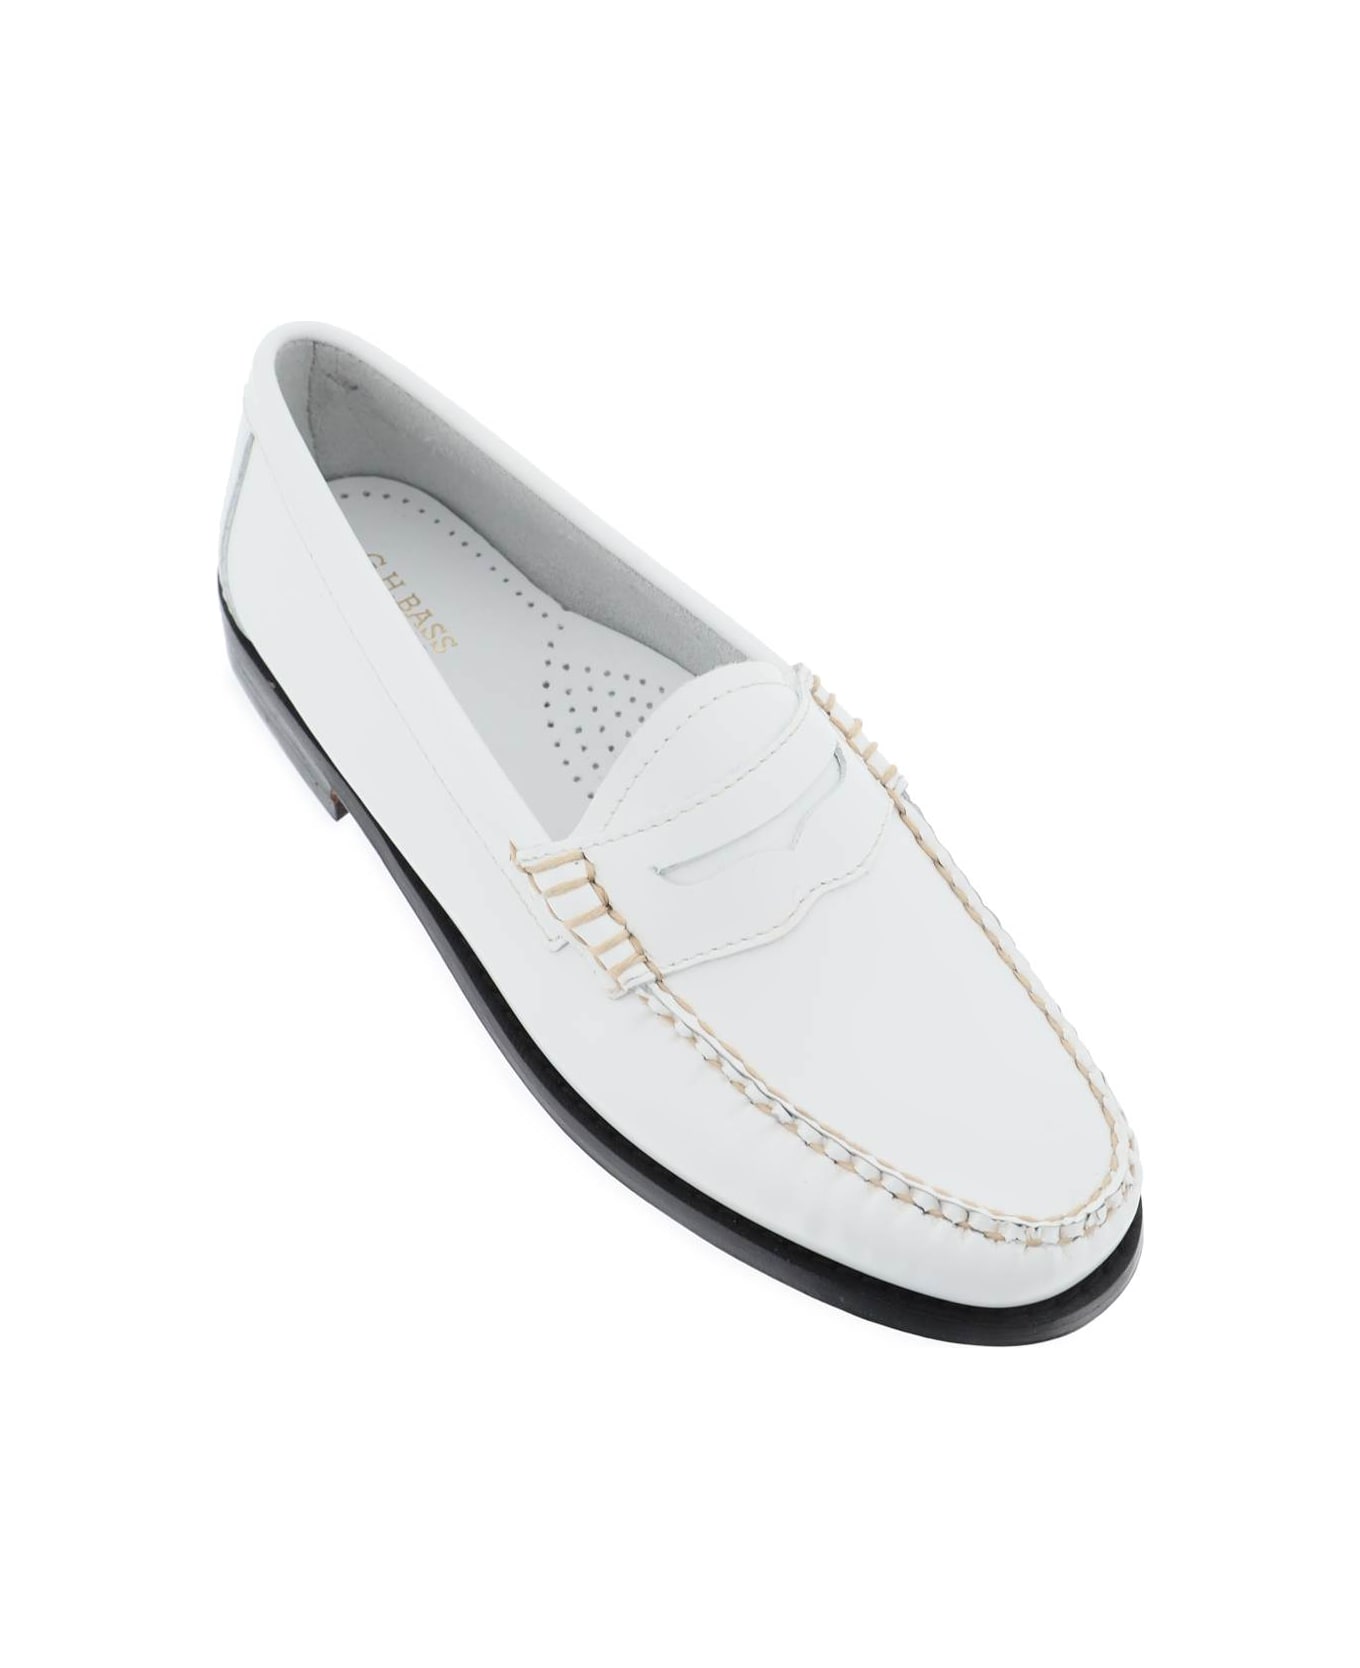 G.H.Bass & Co. Weejuns Penny Loafers - WHITE (White) フラットシューズ